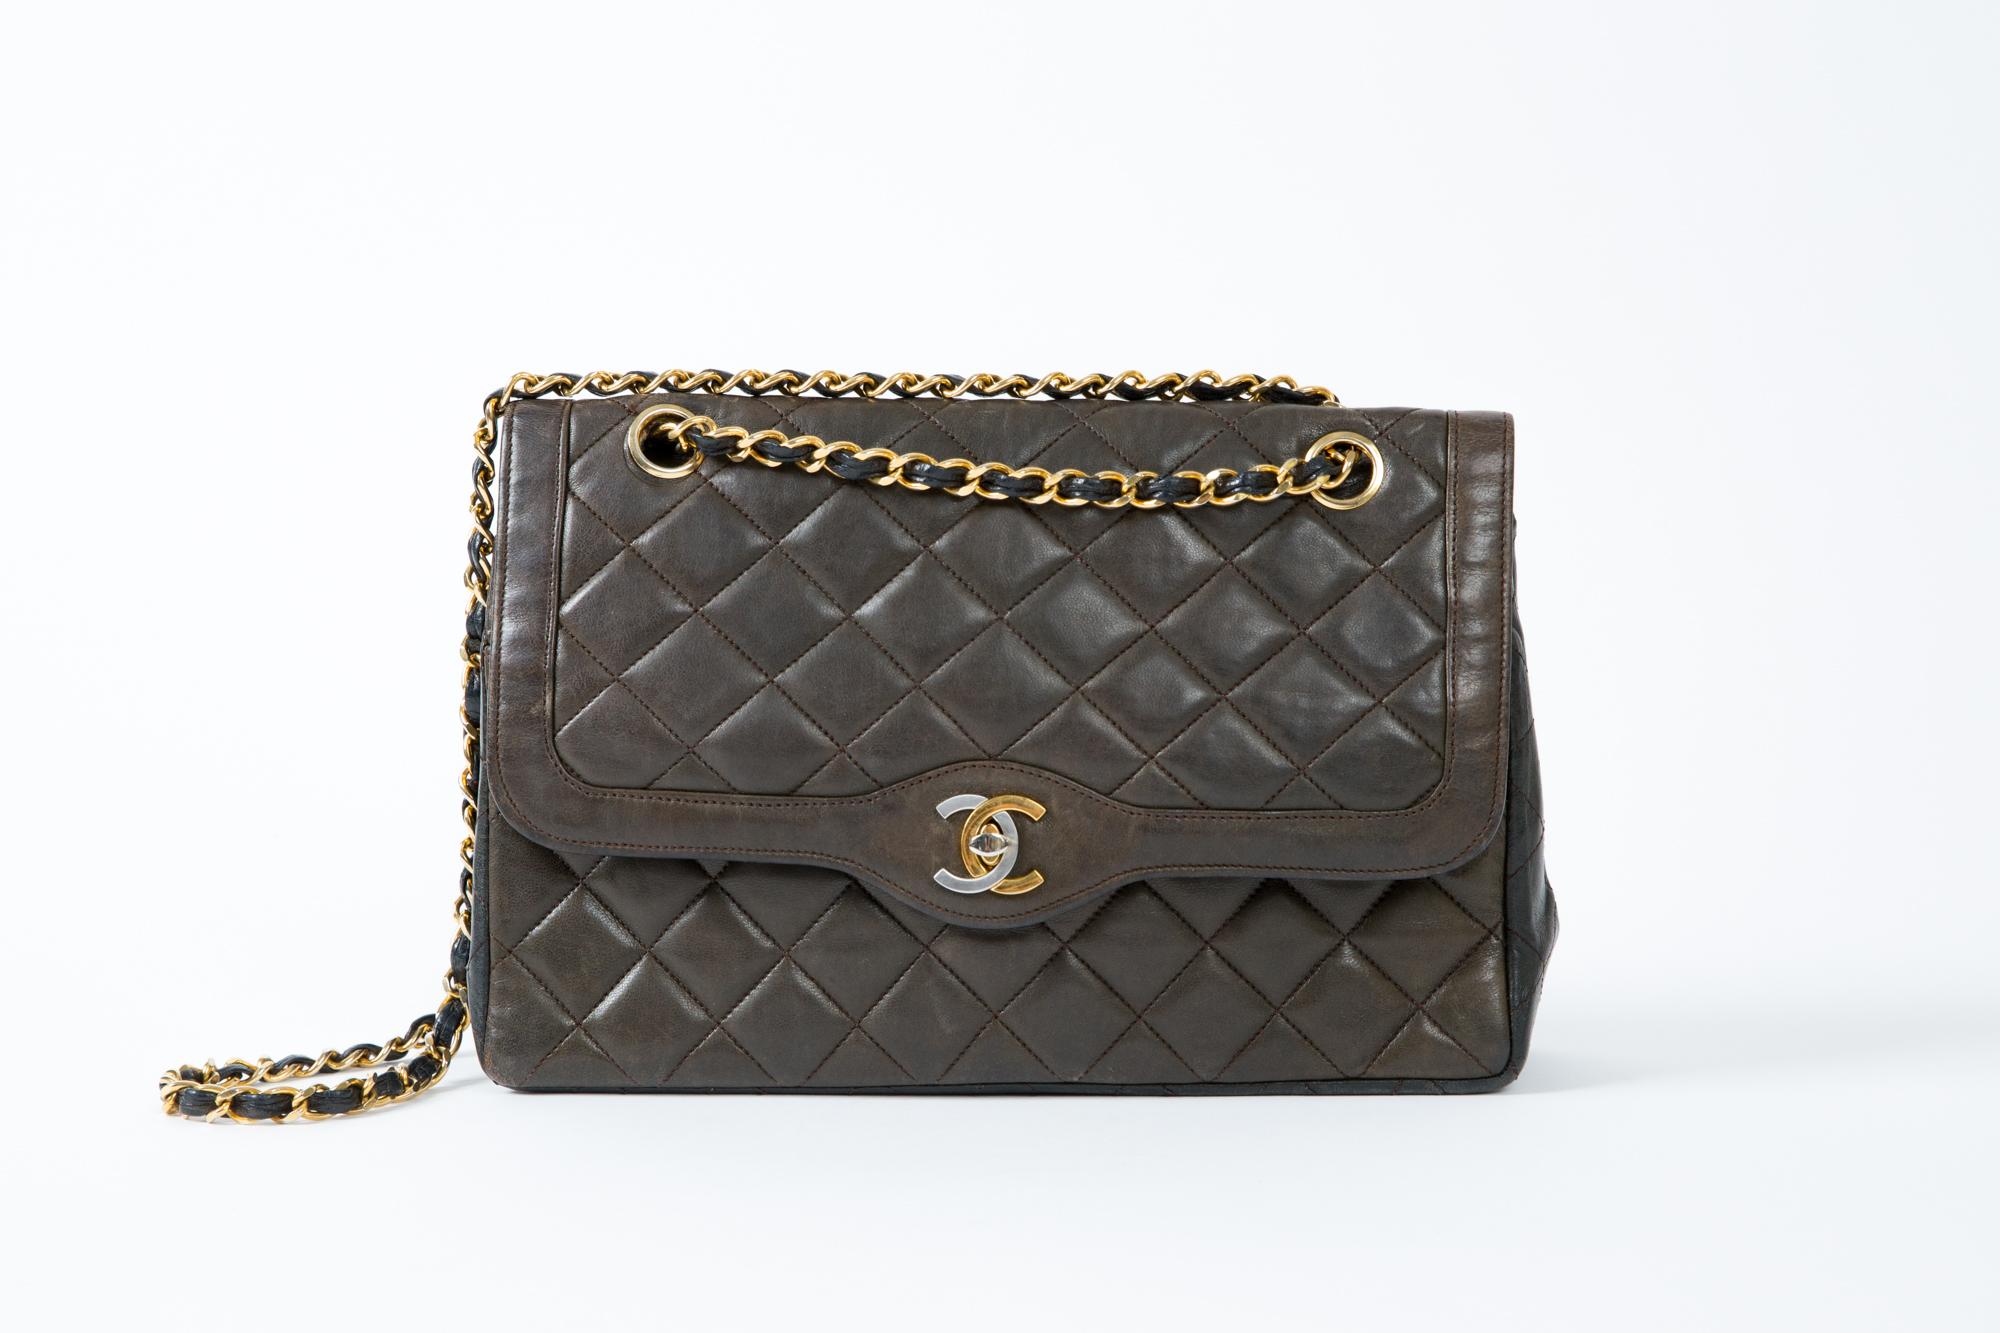 1980s chocolate and black two tones lambskin leather  Chanel Diana shoulder bag, Limited Edition double flap bag featuring a CC closure, Chanel CC turn lock in silver and gold metal opens to a double flap interior, one open pocket under the main